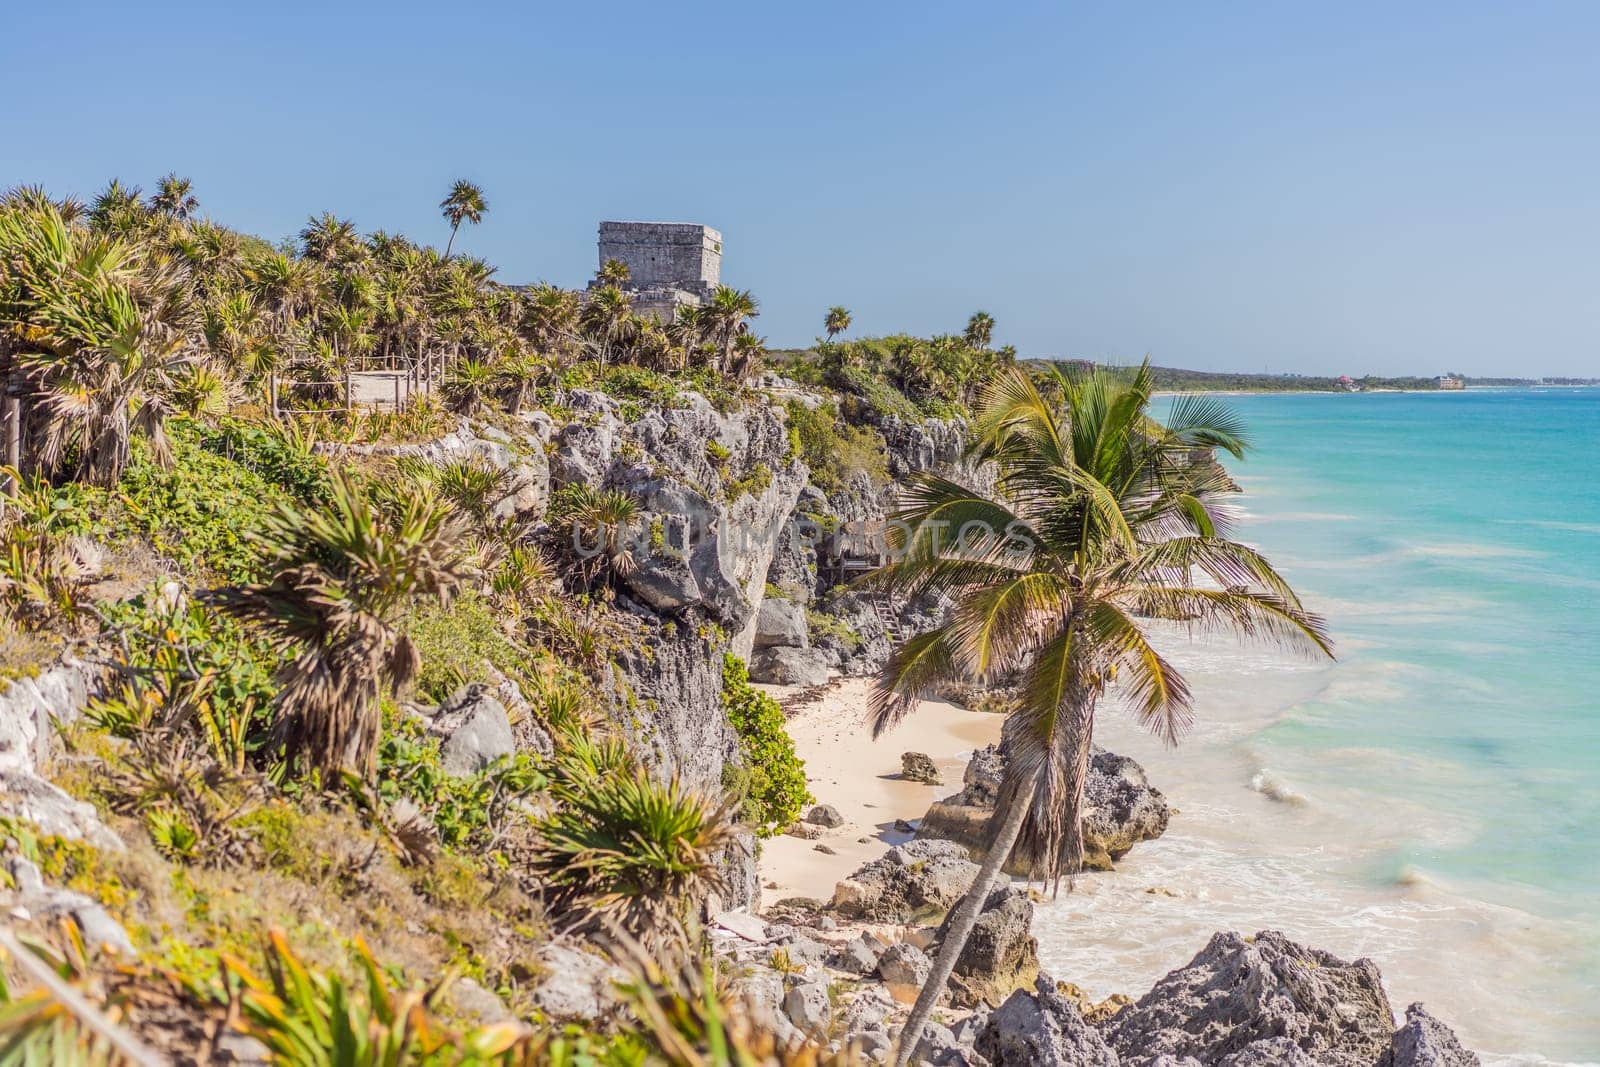 Beautiful archaeological site of the Mayan culture in Tulum, Mexico.